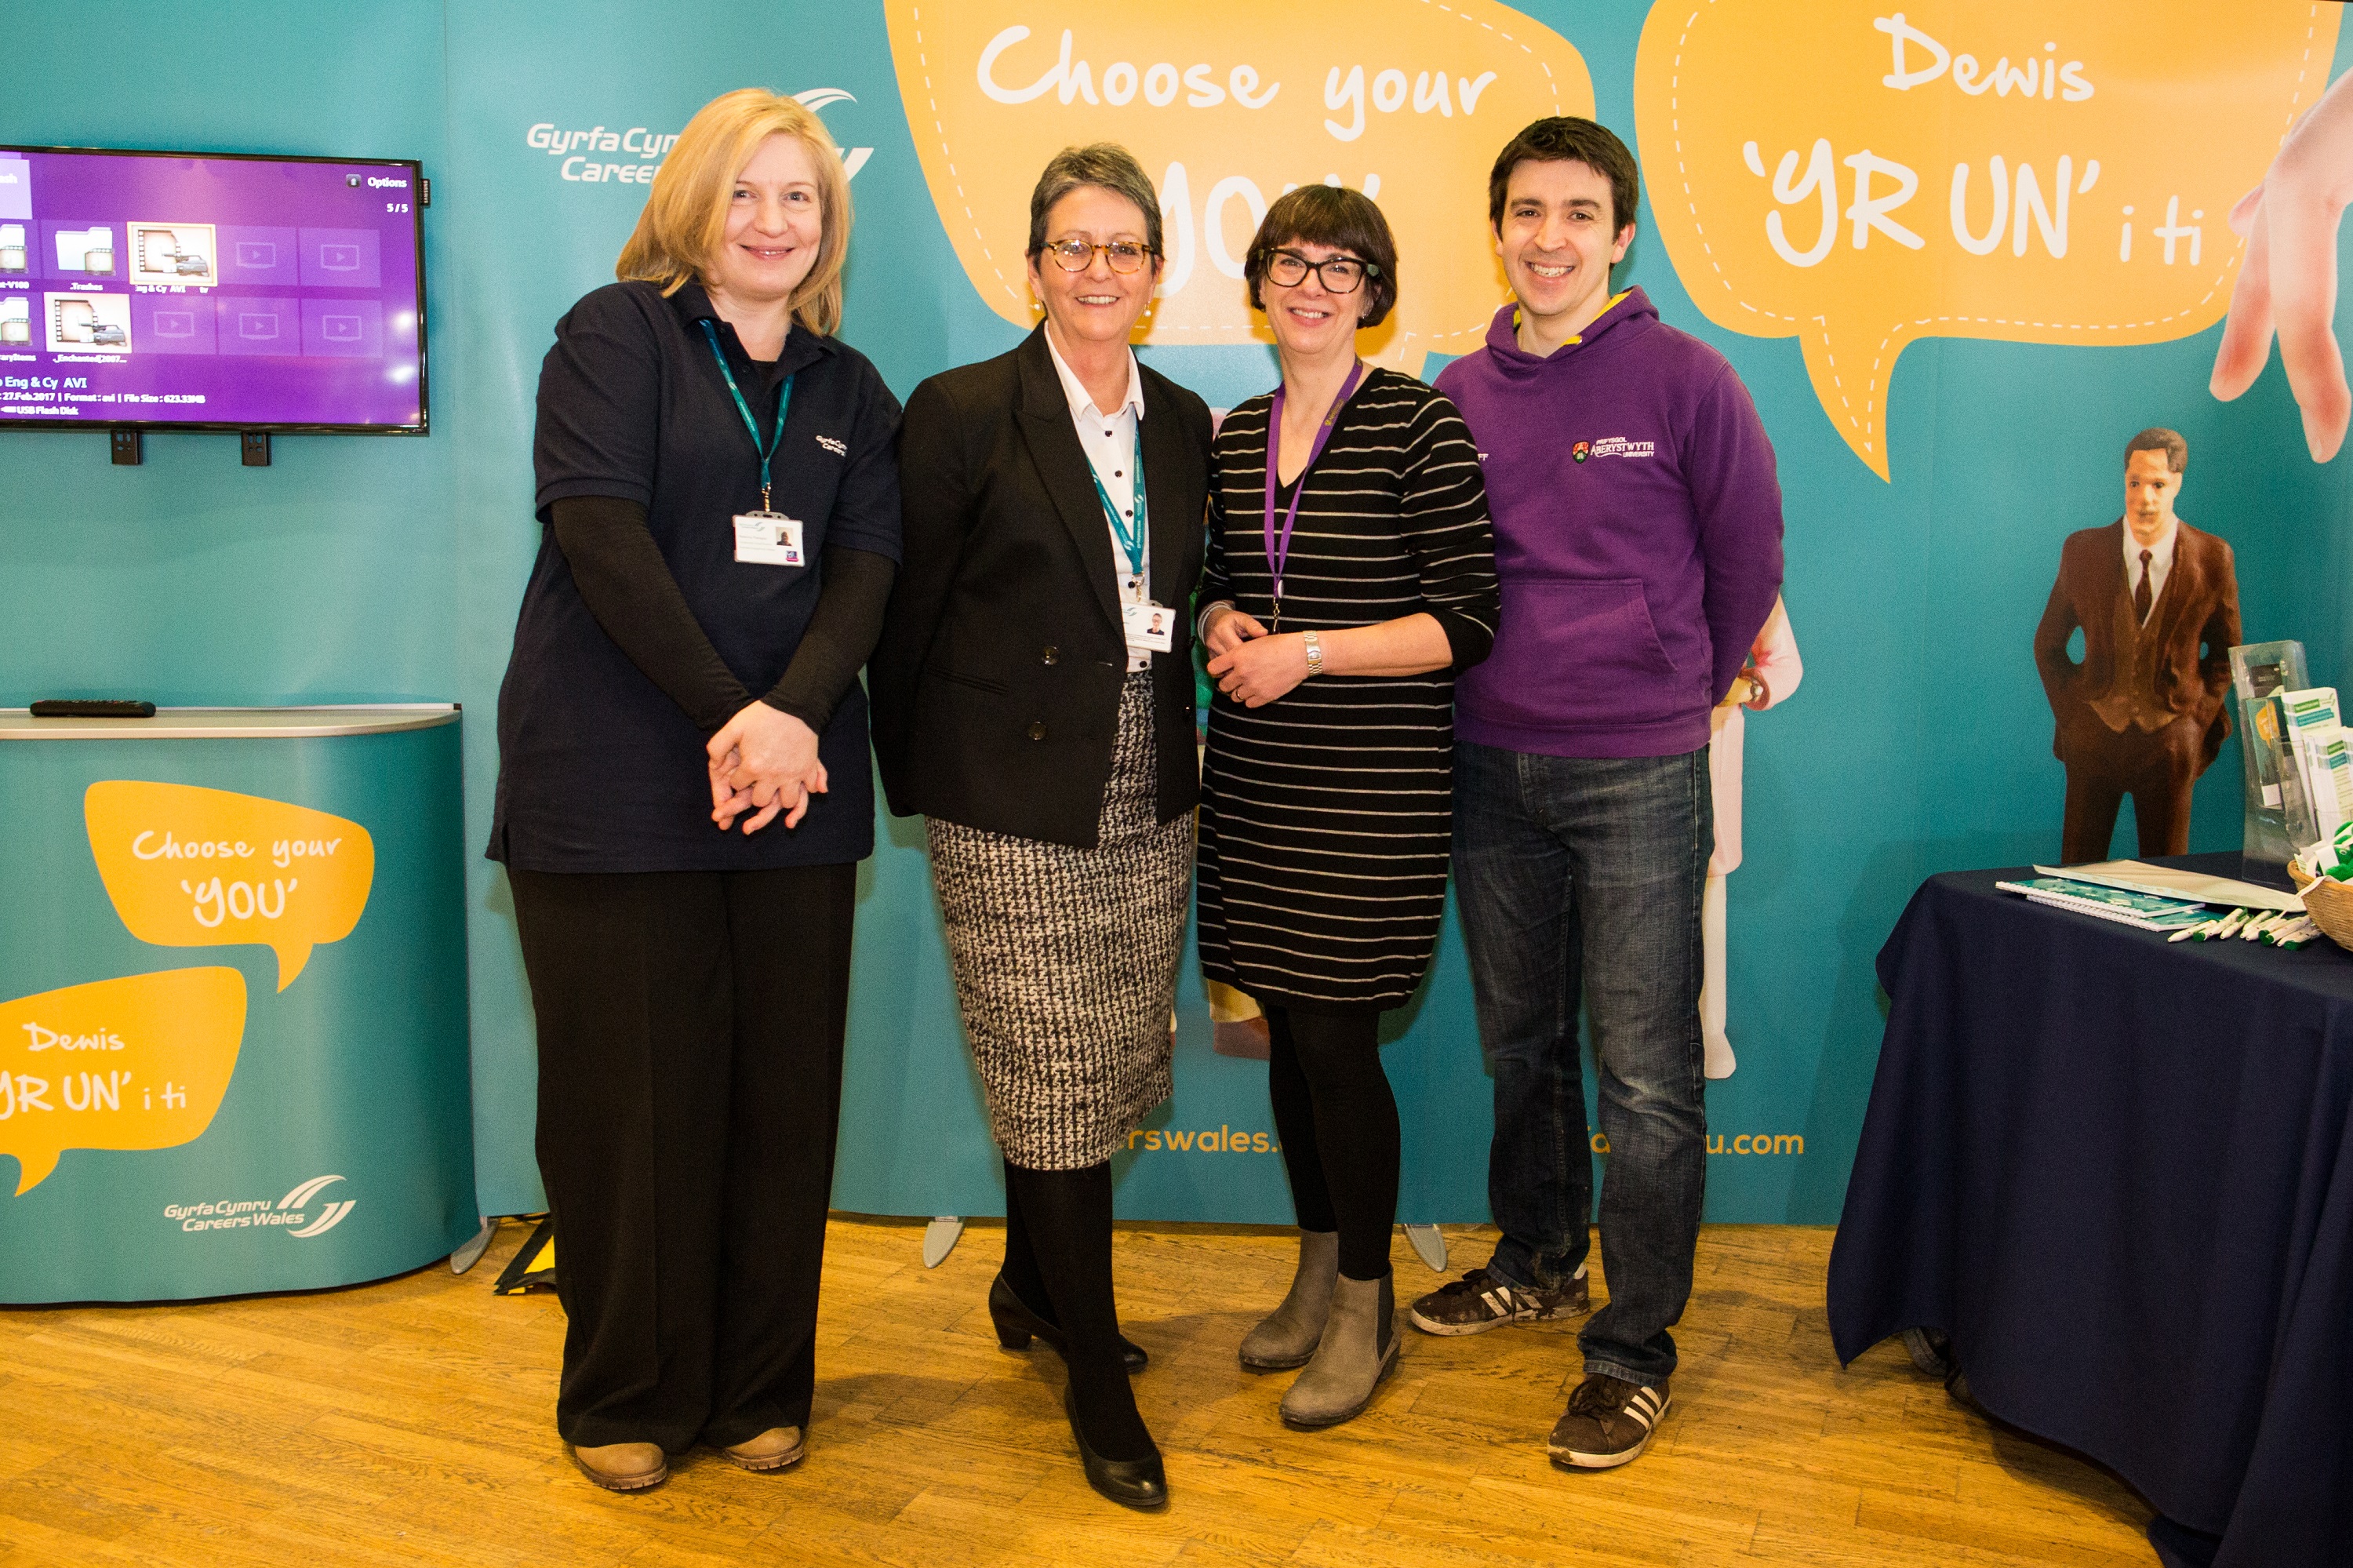 Left to right: Rebecca Flanagan (Careers Wales) Lesley Clarke (Careers Wales), Rebecca Davies (Pro Vice-Chancellor and Chief Operating Officer, Aberystwyth University) and David Moyle (Head of Undergraduate Admissions & Schools Liaison, Aberystwyth University)